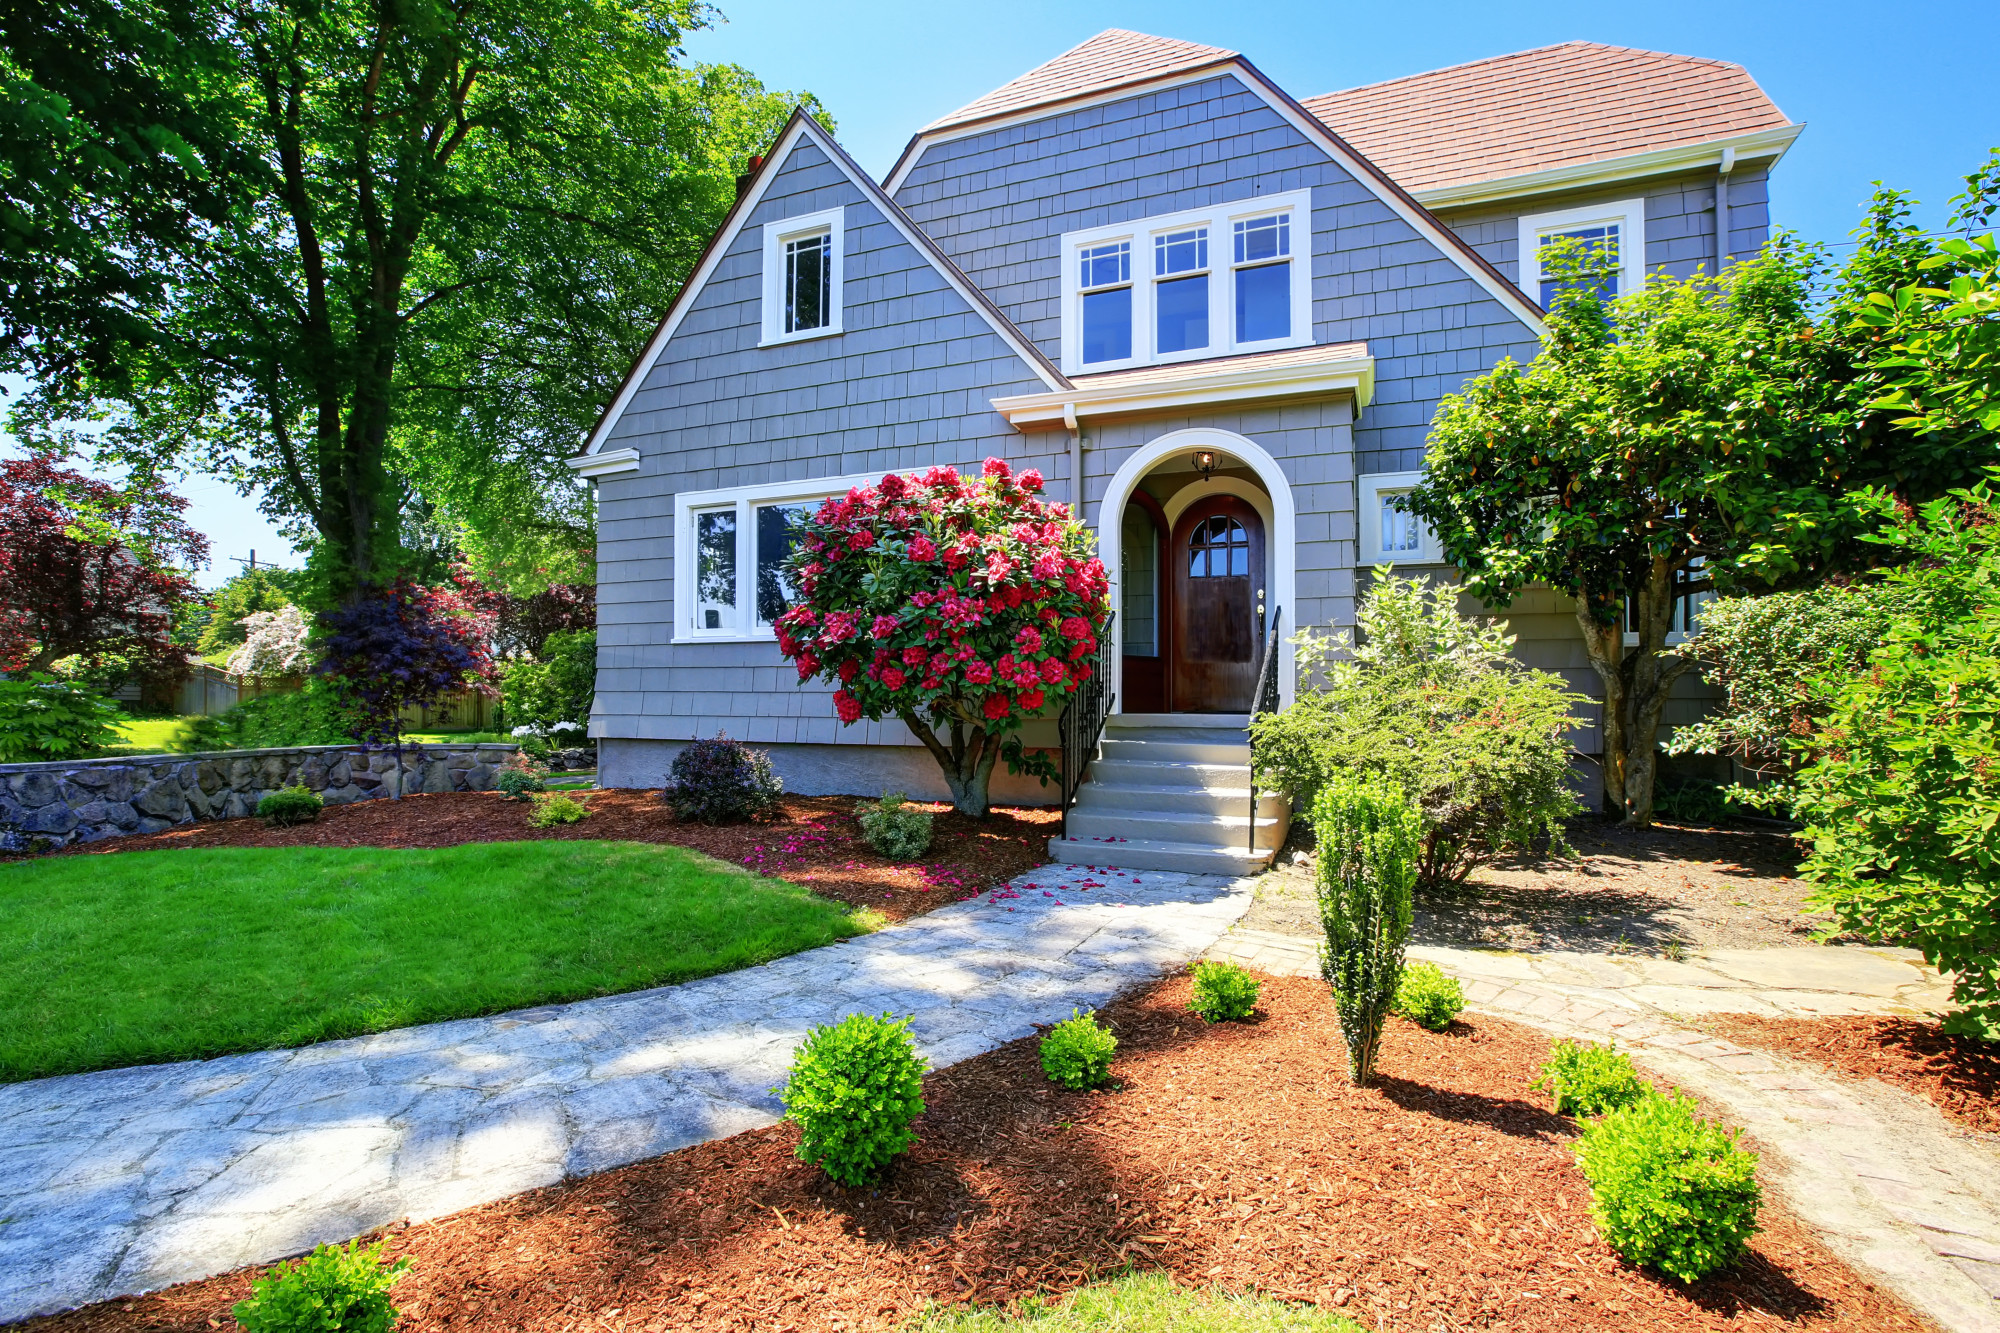 Curb appeal is a vital factor in home and business appearance. These easy curb appeal ideas will help you get your home or business looking better quickly.